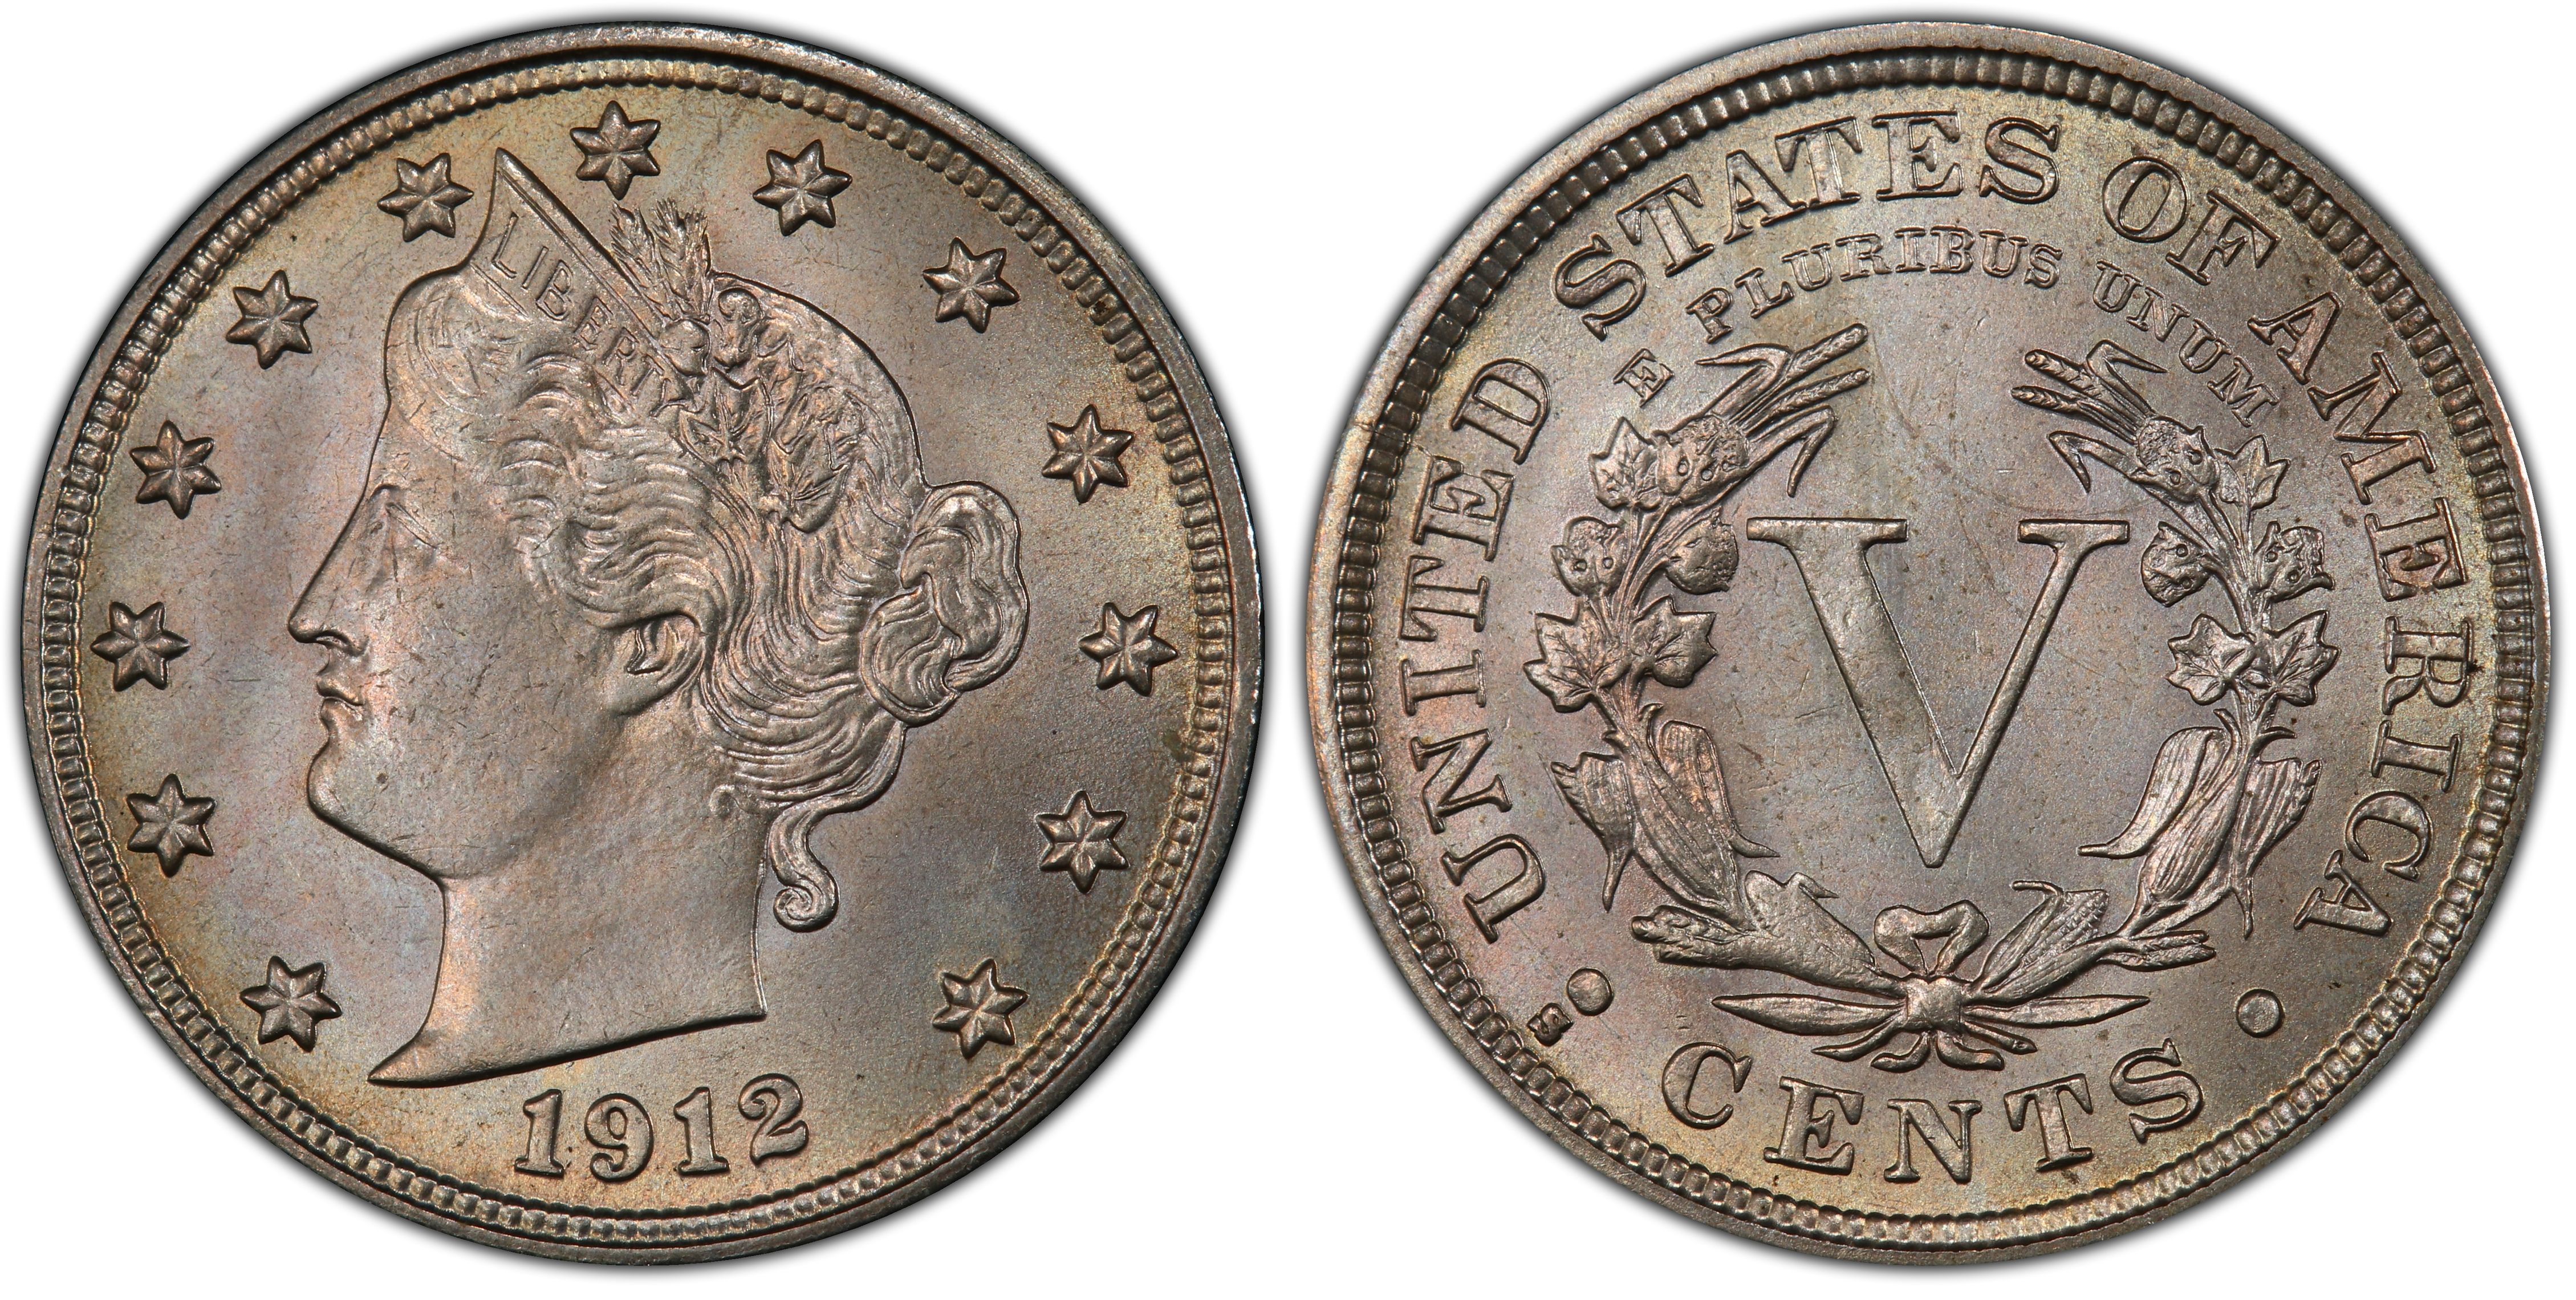 Liberty Nickel - PCGS CoinFacts